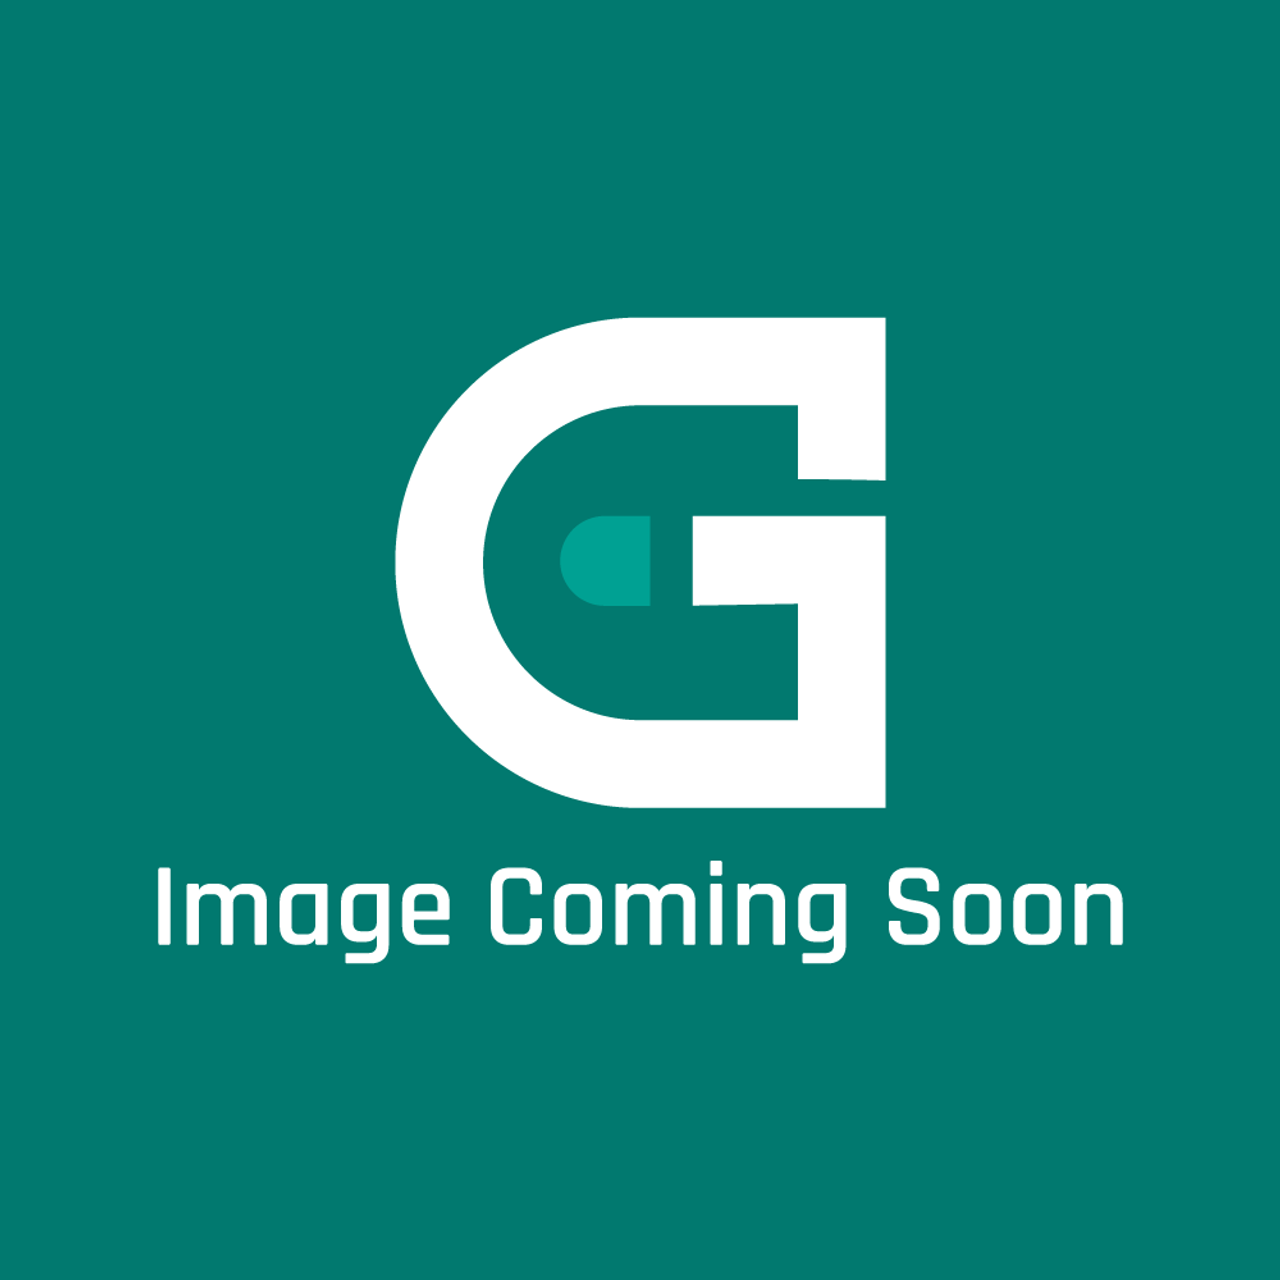 Garland CKG2674-1 - Thermostat G1 150F To 45 0F Kit - Image Coming Soon!